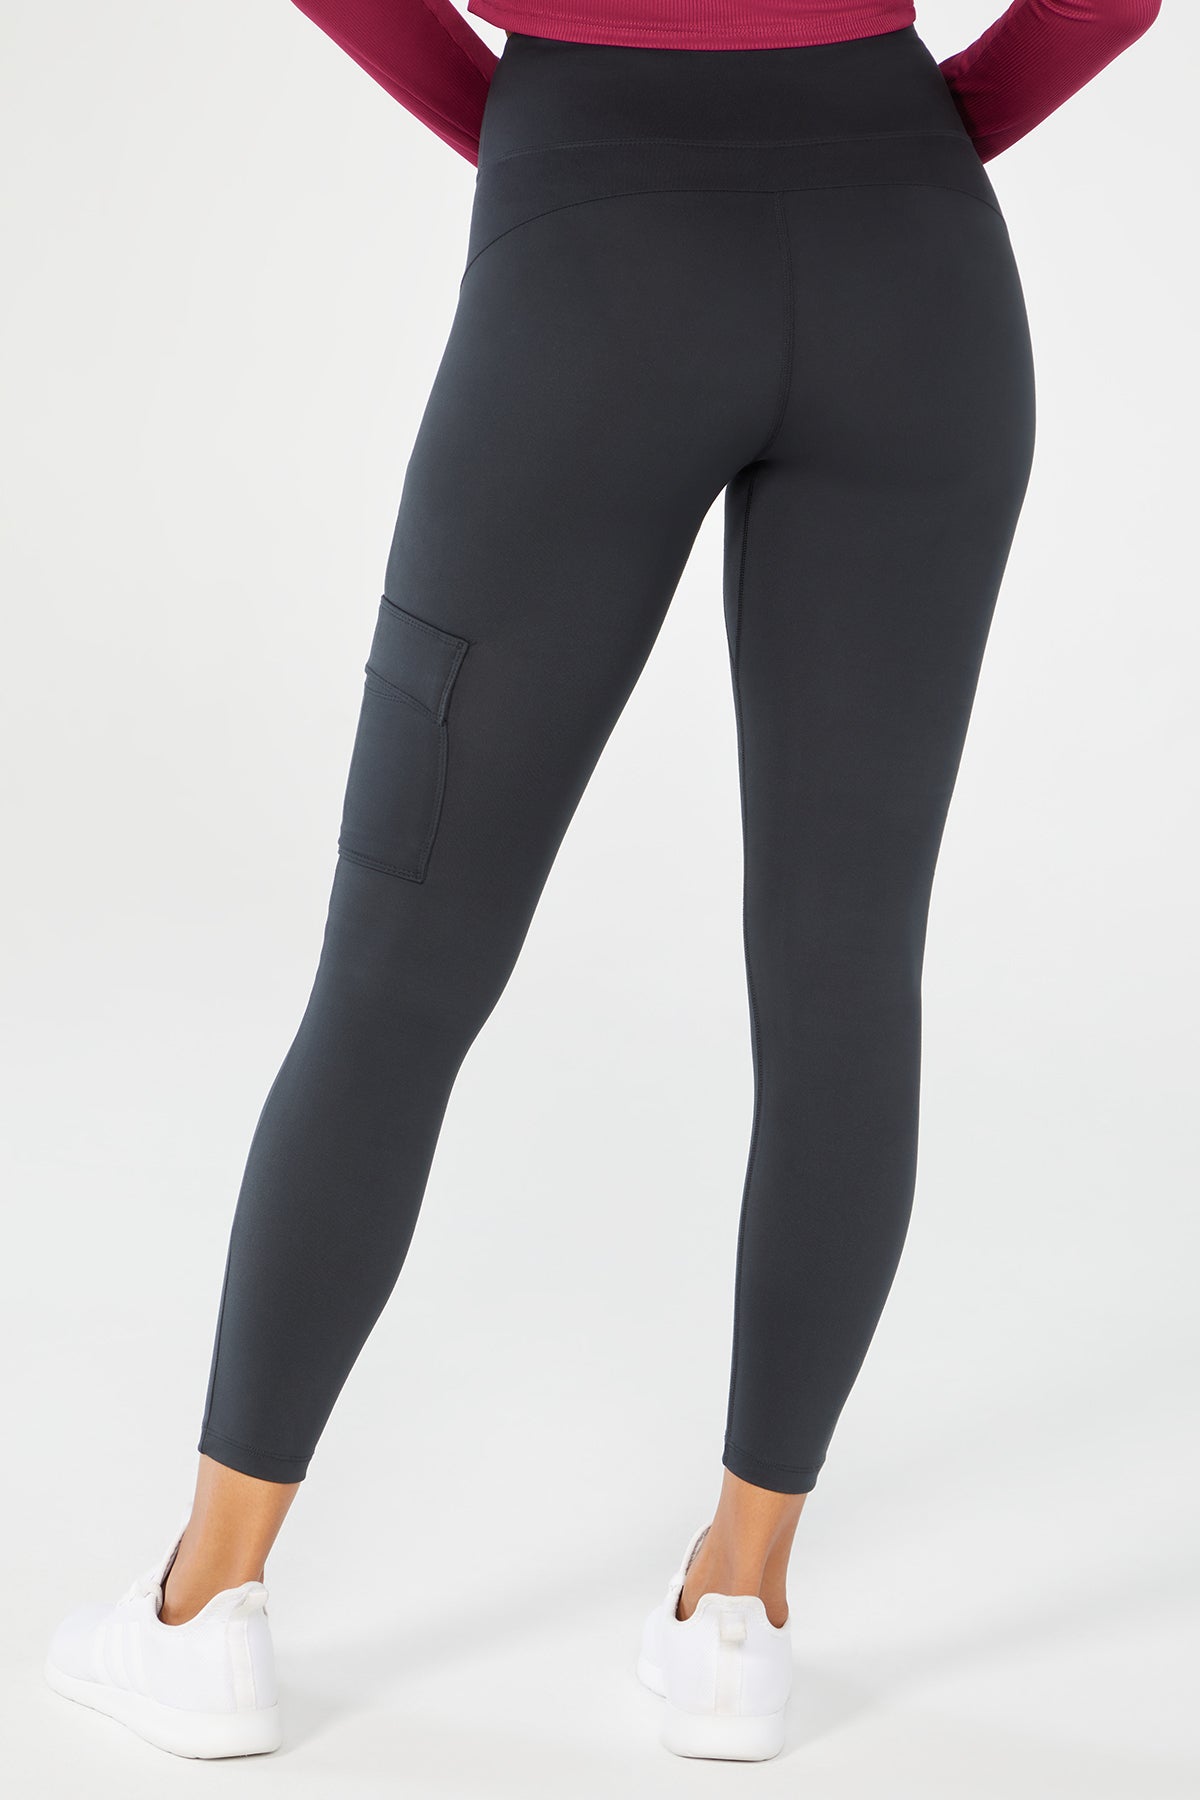 Workout Style: The Best Mesh Panel Workout Leggings